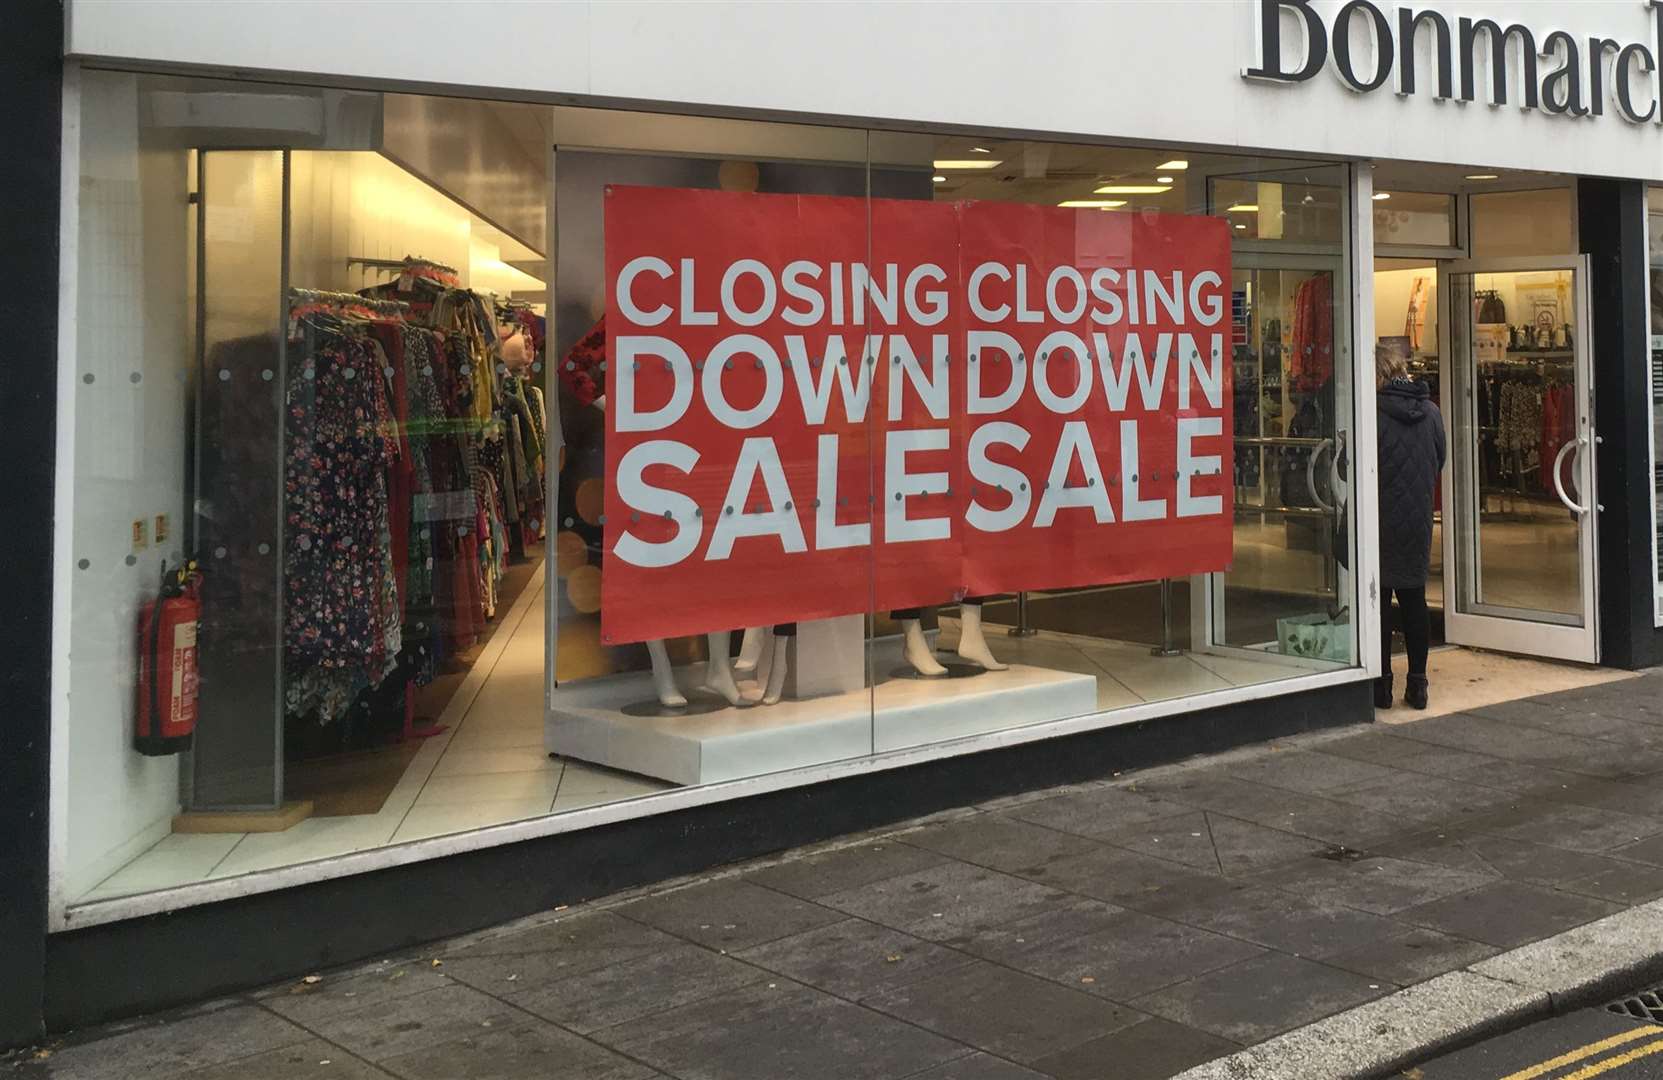 Many high street shops face permanent closure due to the virus